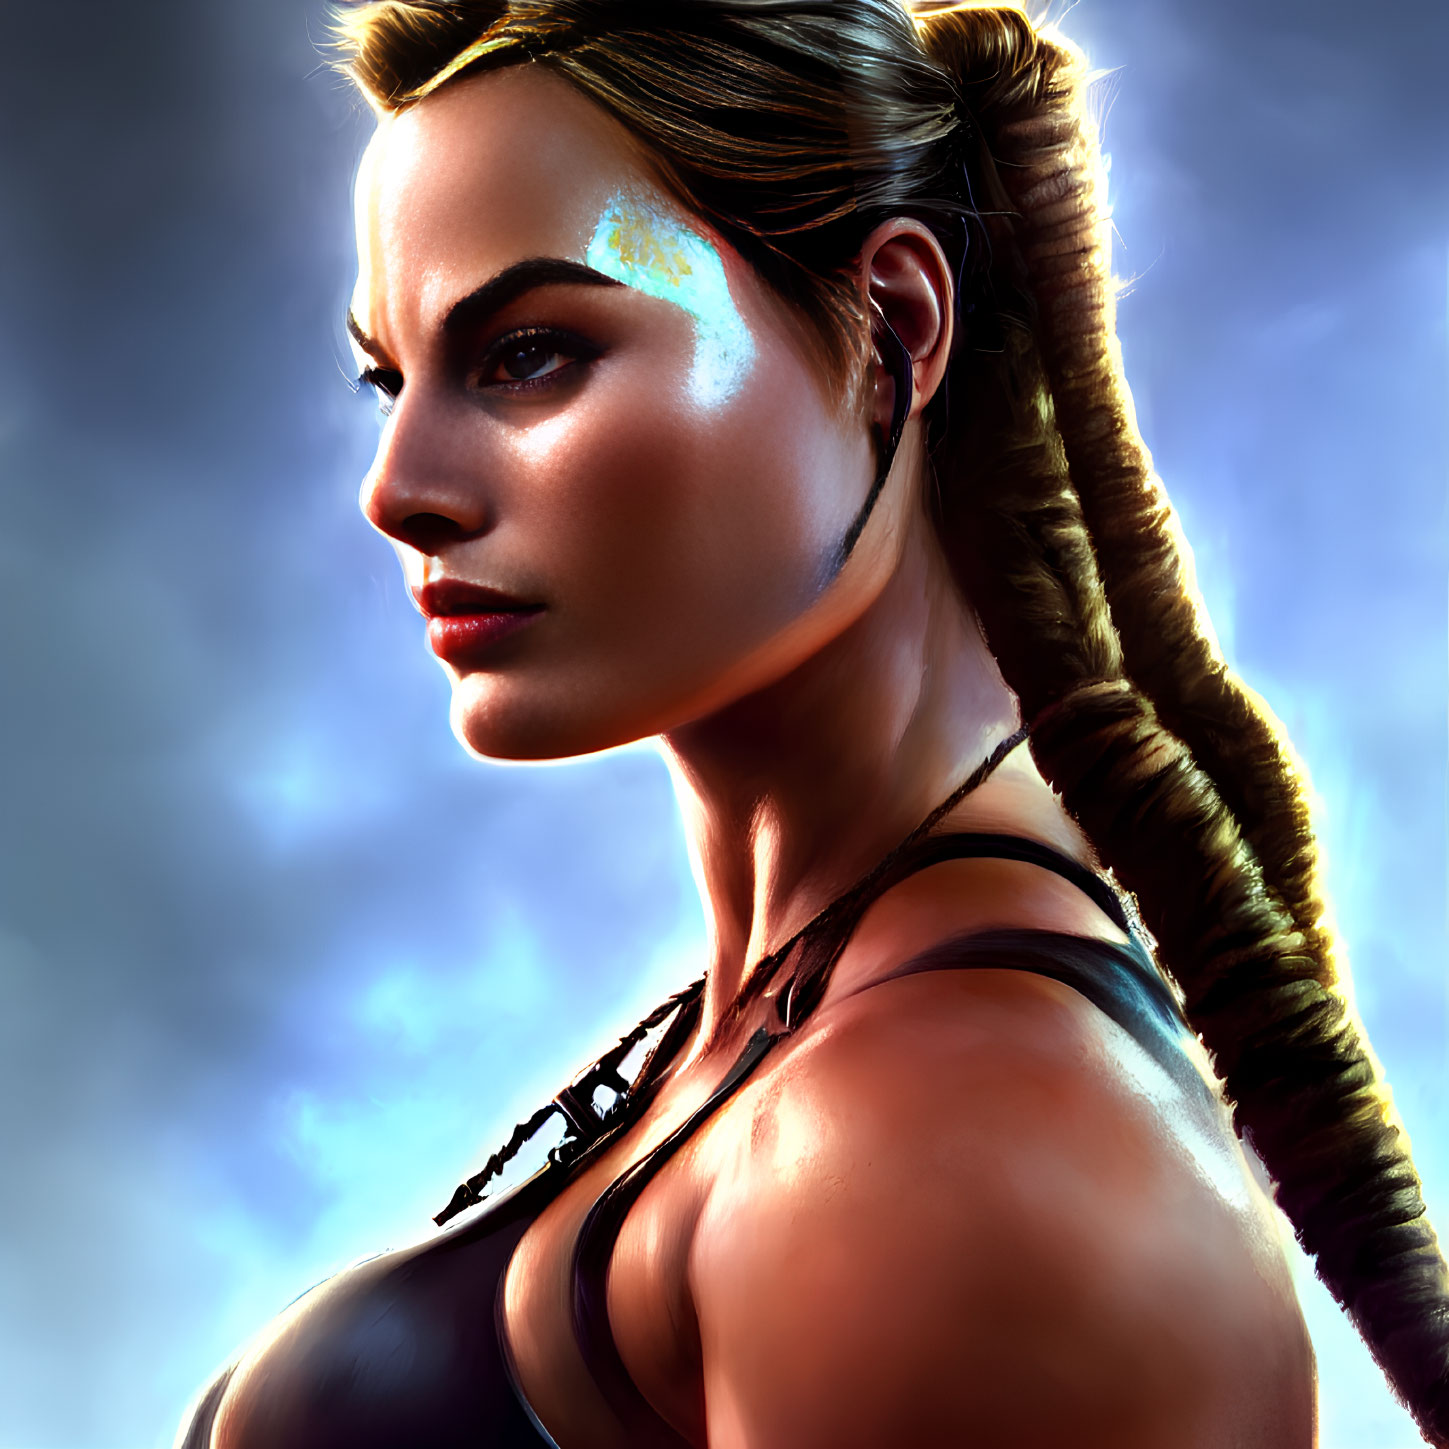 Portrait of woman with braid and war paint, against blue background